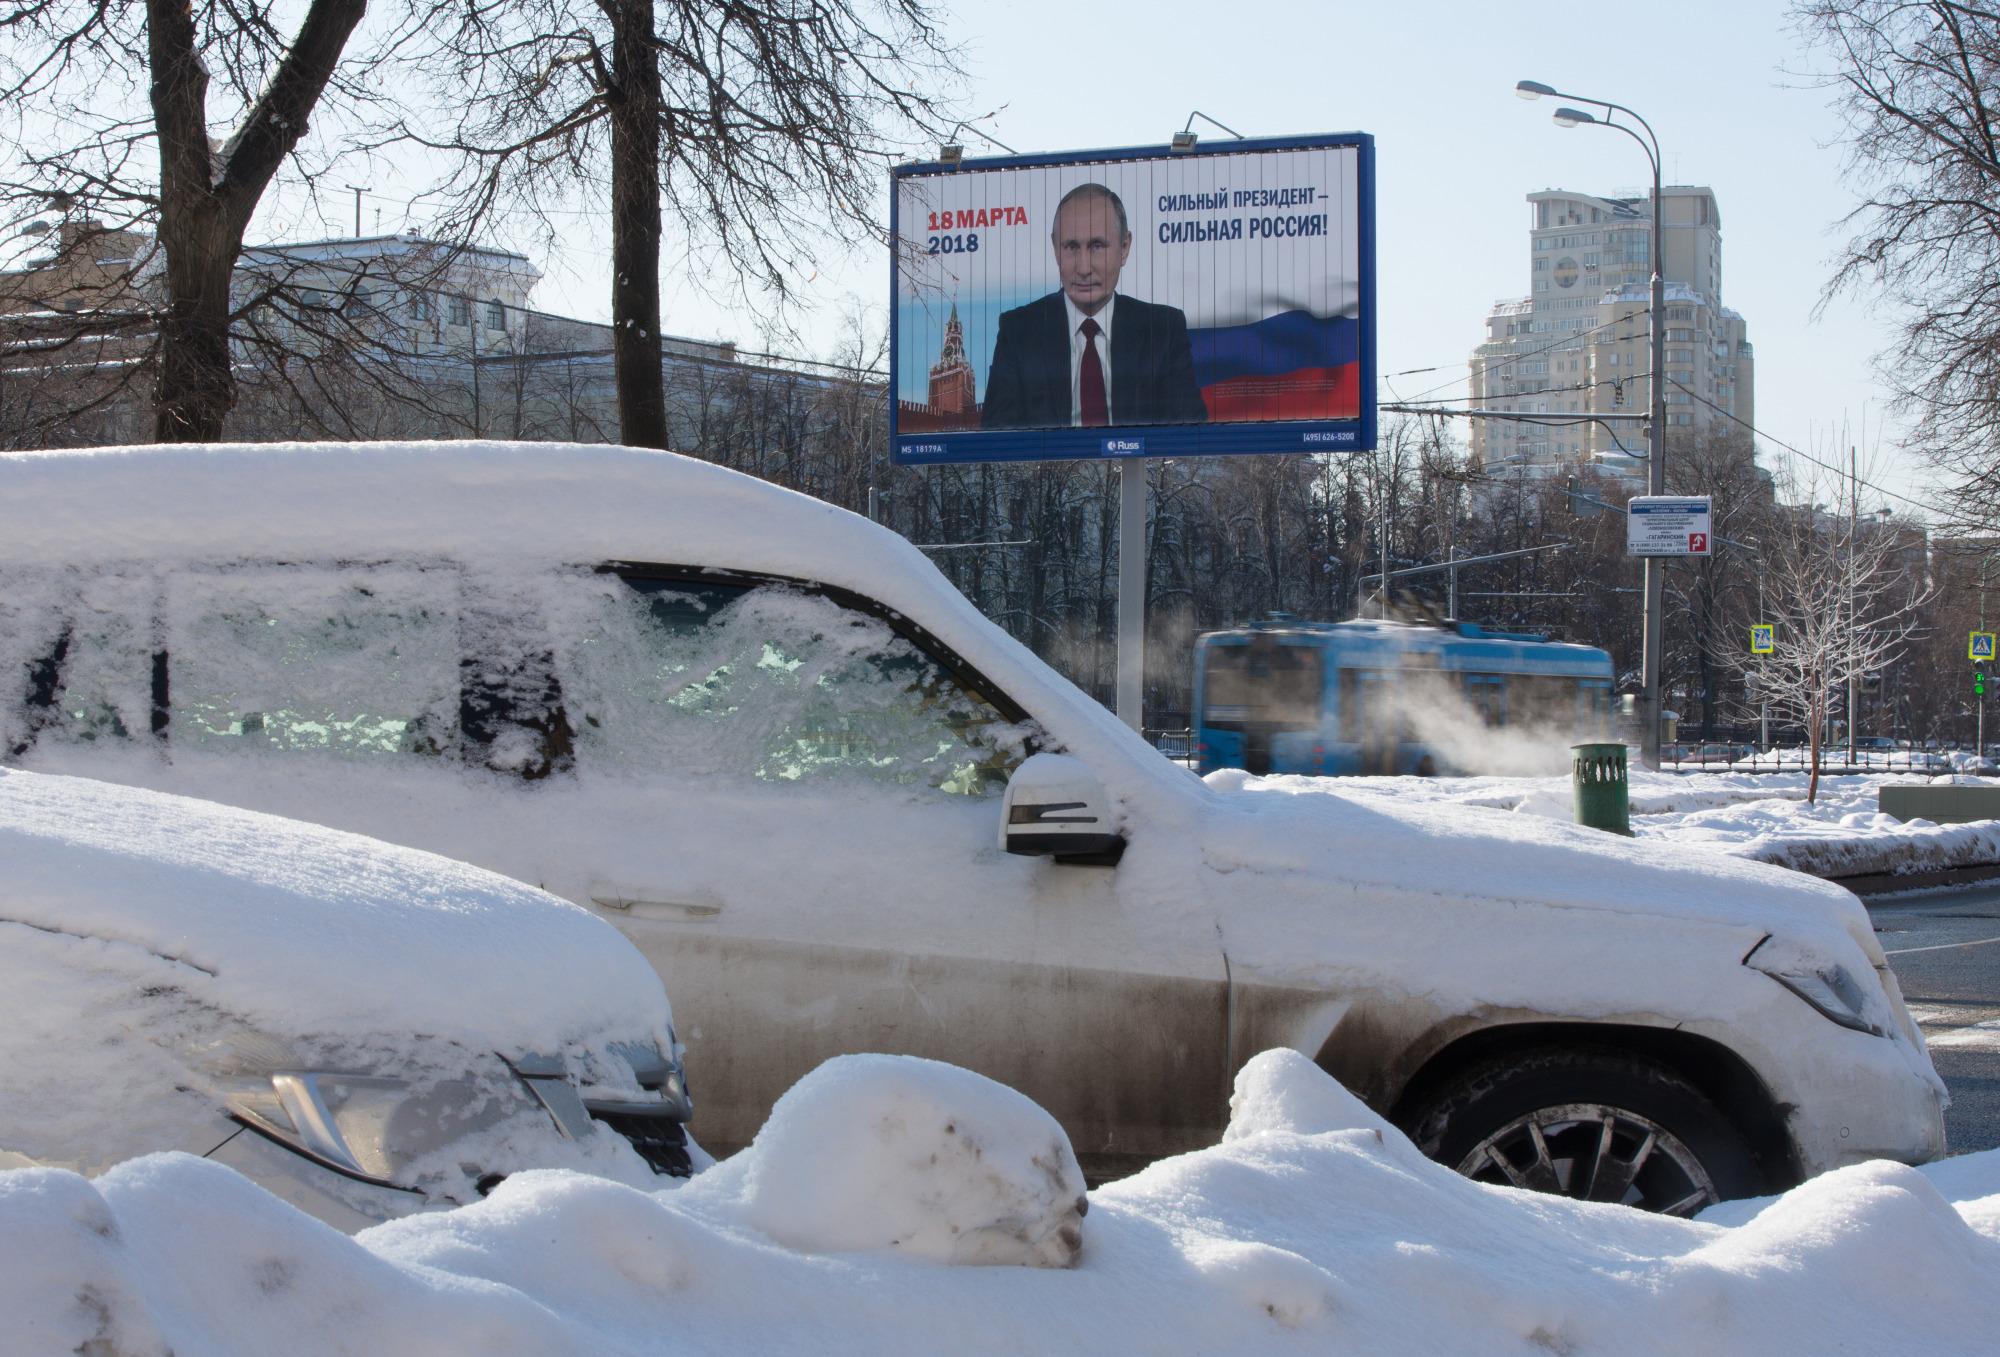 An election campaign billboard poster featuring incumbent Russian President Vladimir Putin stands beyond snow covered automobiles in Moscow, Russia. Photographer: Andrey Rudakov/Bloomberg